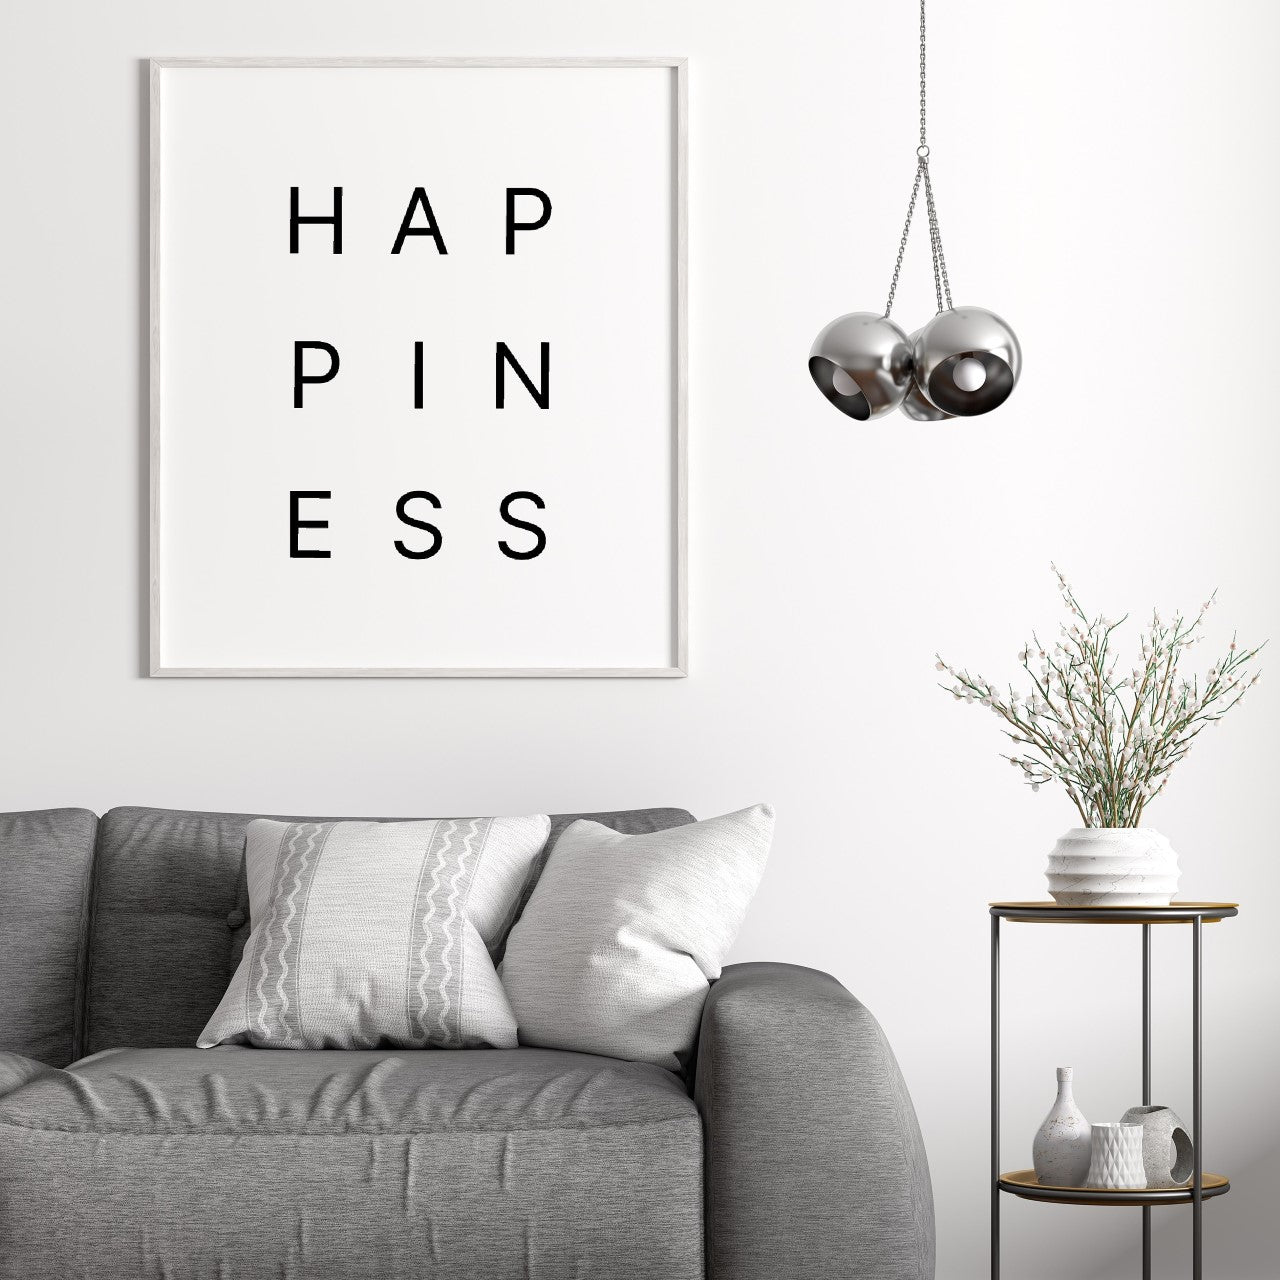 Quote Print | Happiness | Motivational Print | Positive Print